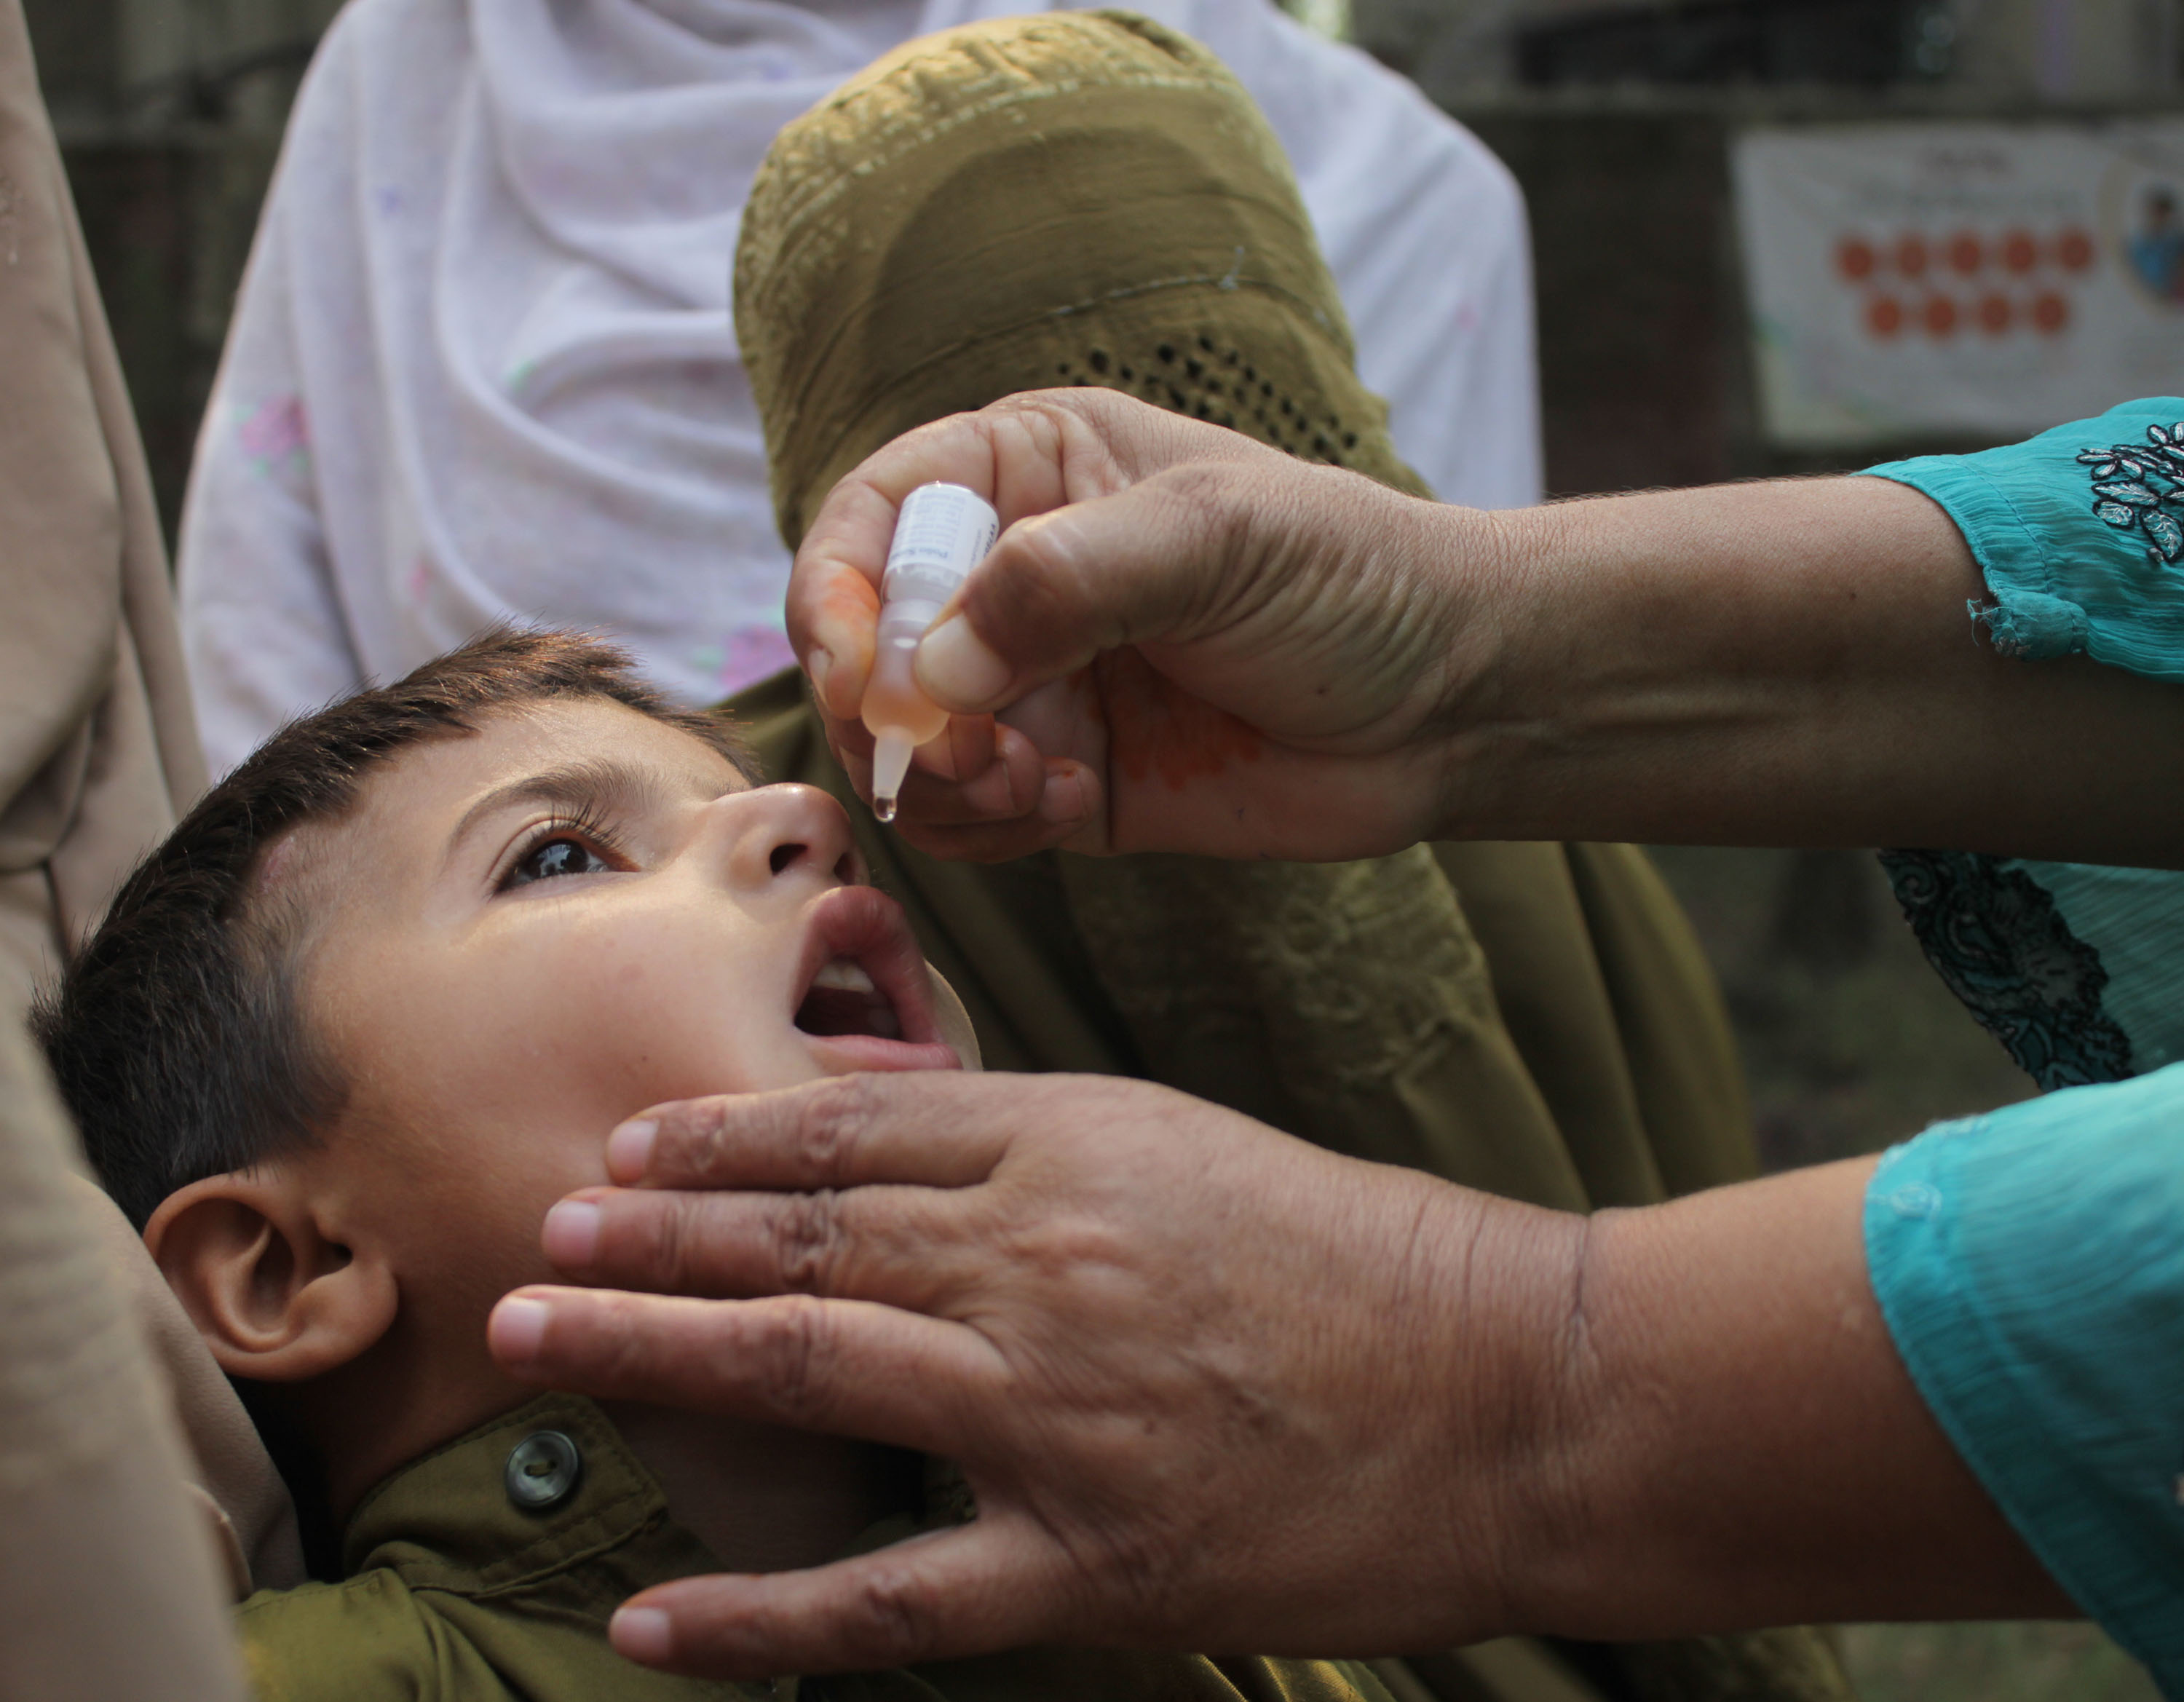 All good now: A child in Lahore, Pakistan receives the polio vaccine in 2014 (Pacific Press/LightRocket/Getty Images)